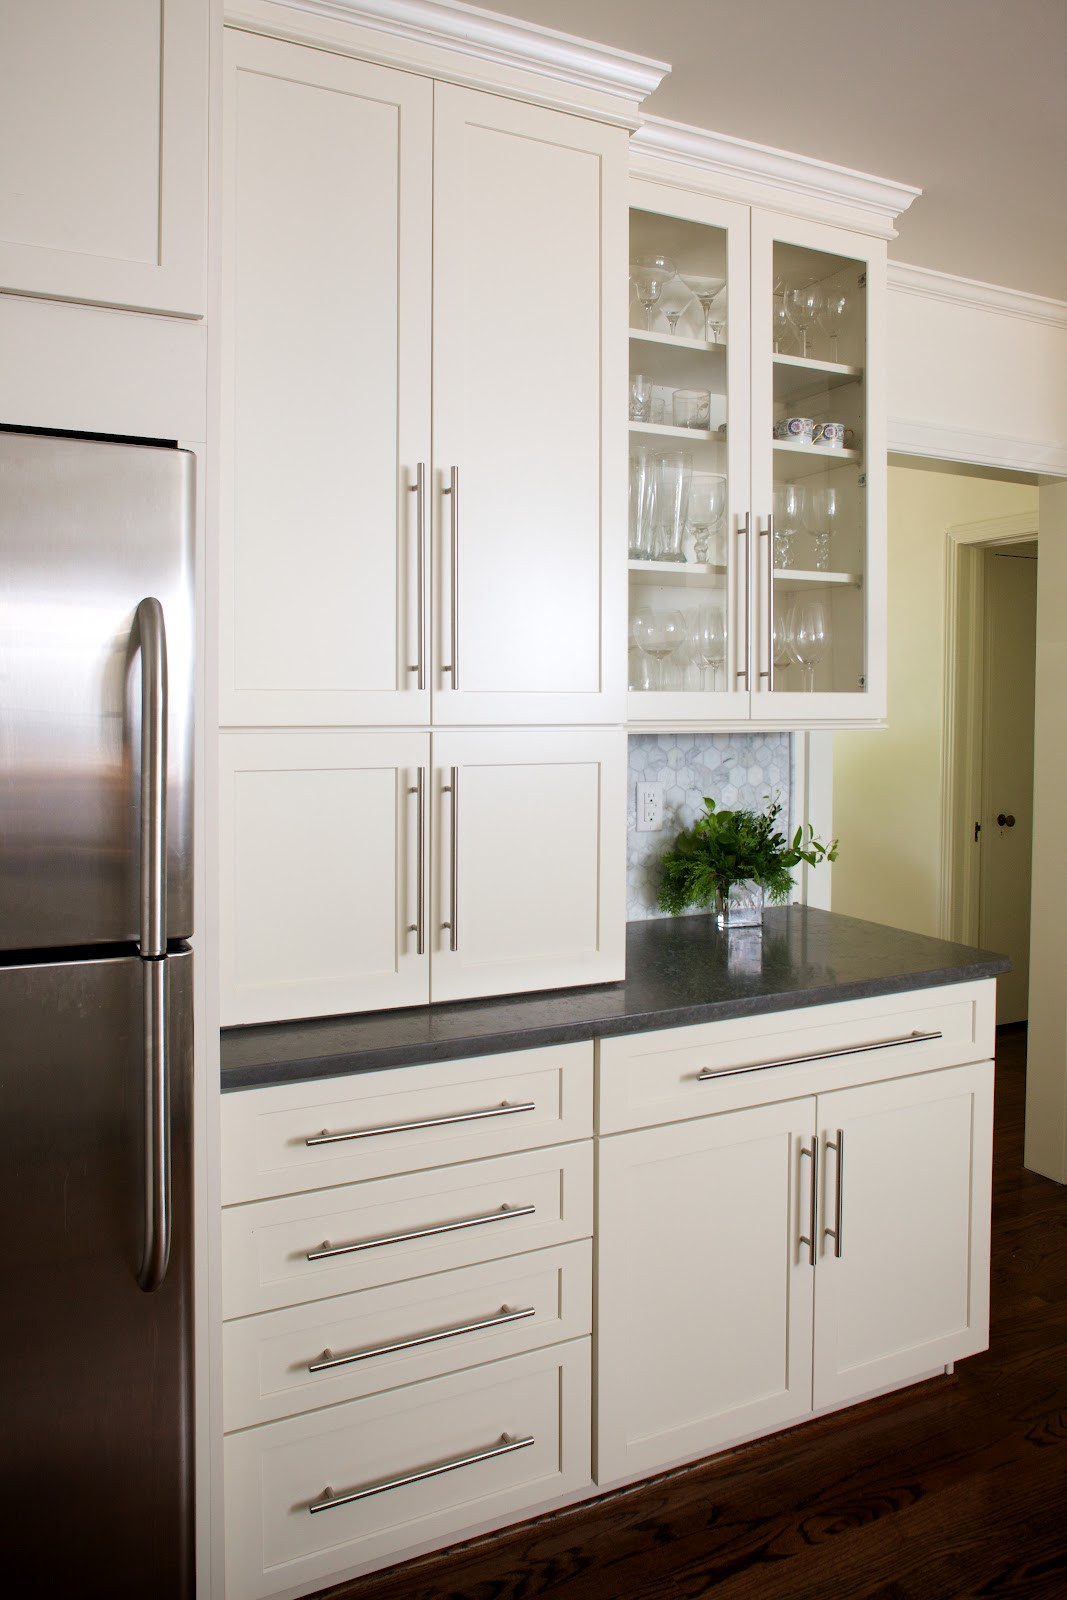 White Kitchen Cabinet Pulls
 Haven and Home Client Kitchen